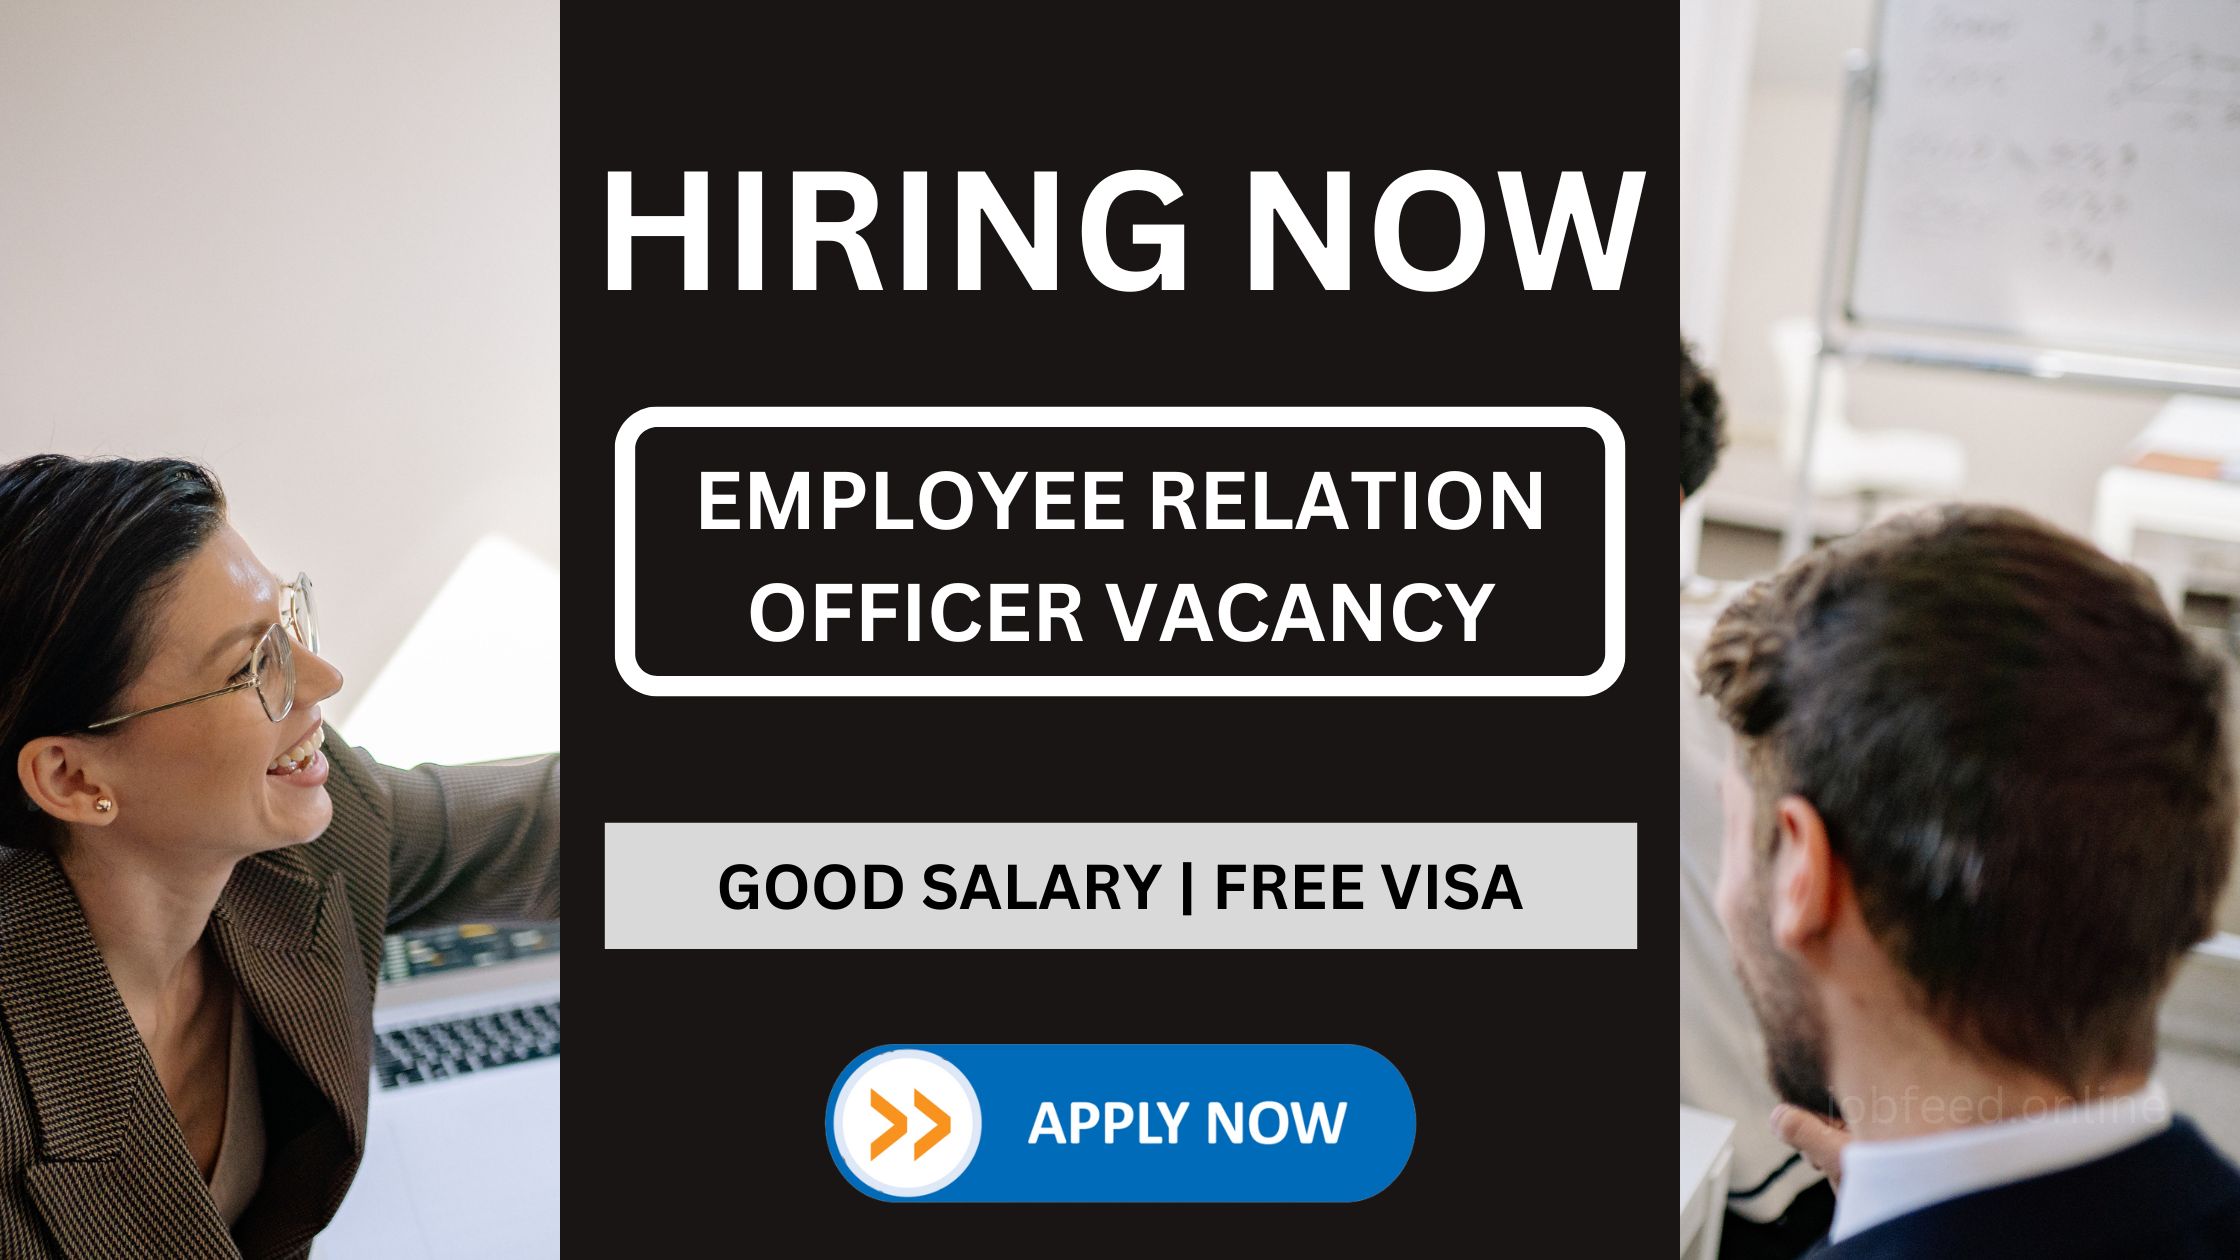 Employee Relation Officer Vacancy - Minimum of 3 years of proven work experience